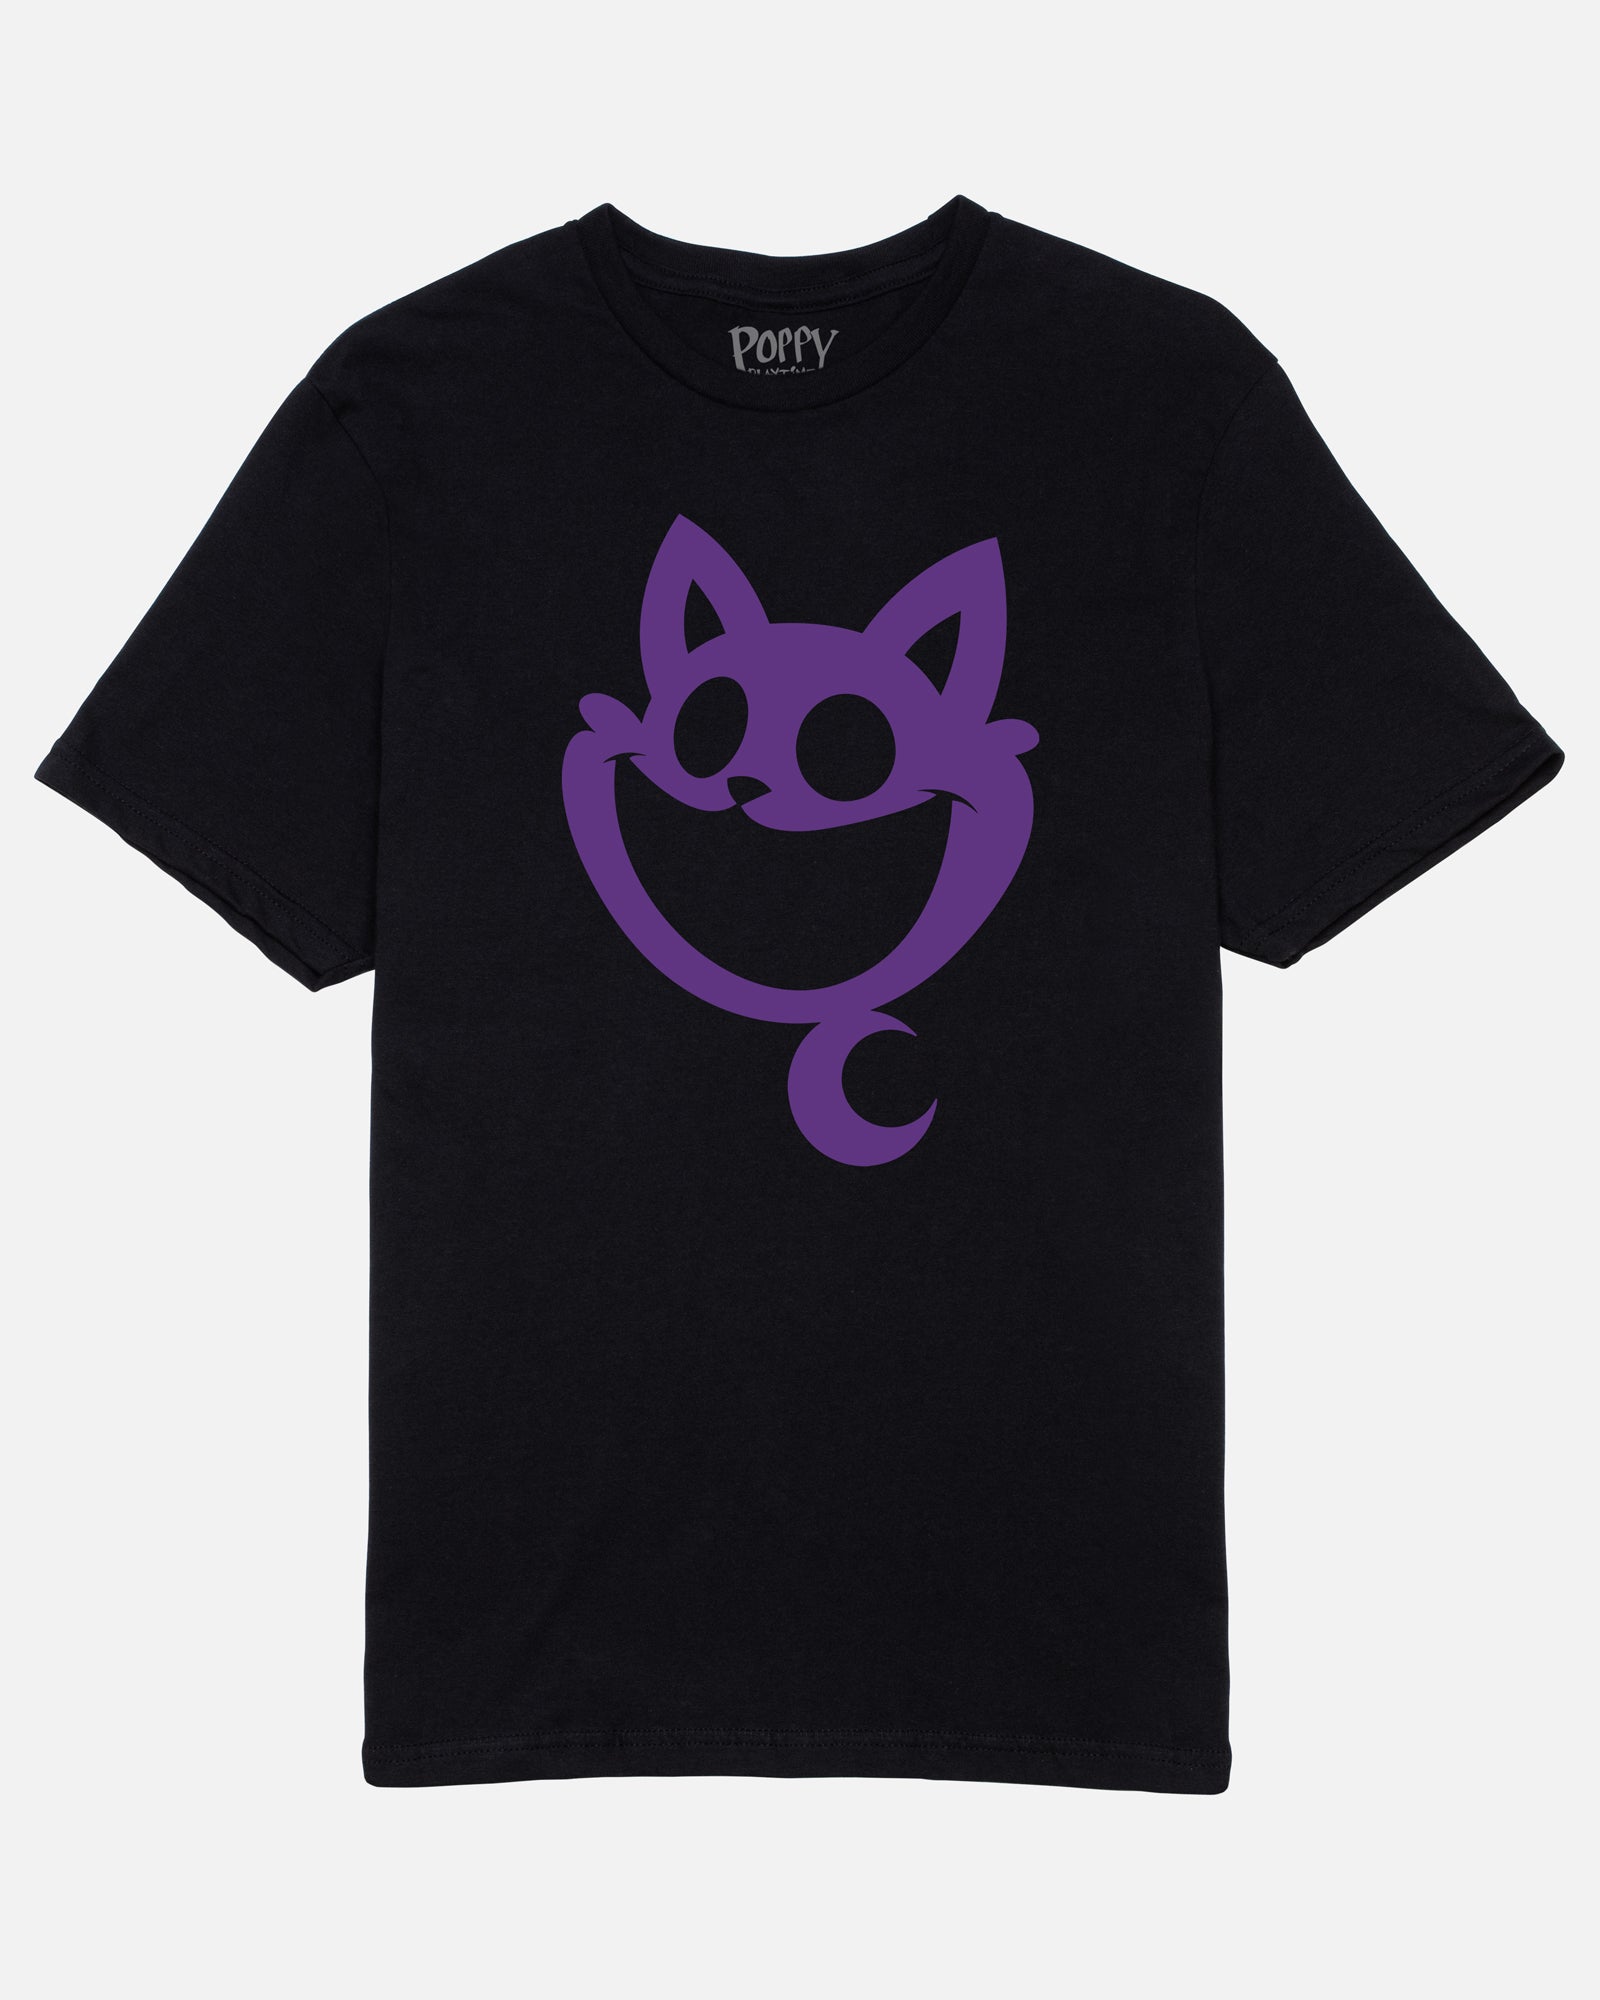 Official poppy Playtime Merch Catnap Face T-Shirt, hoodie, sweater